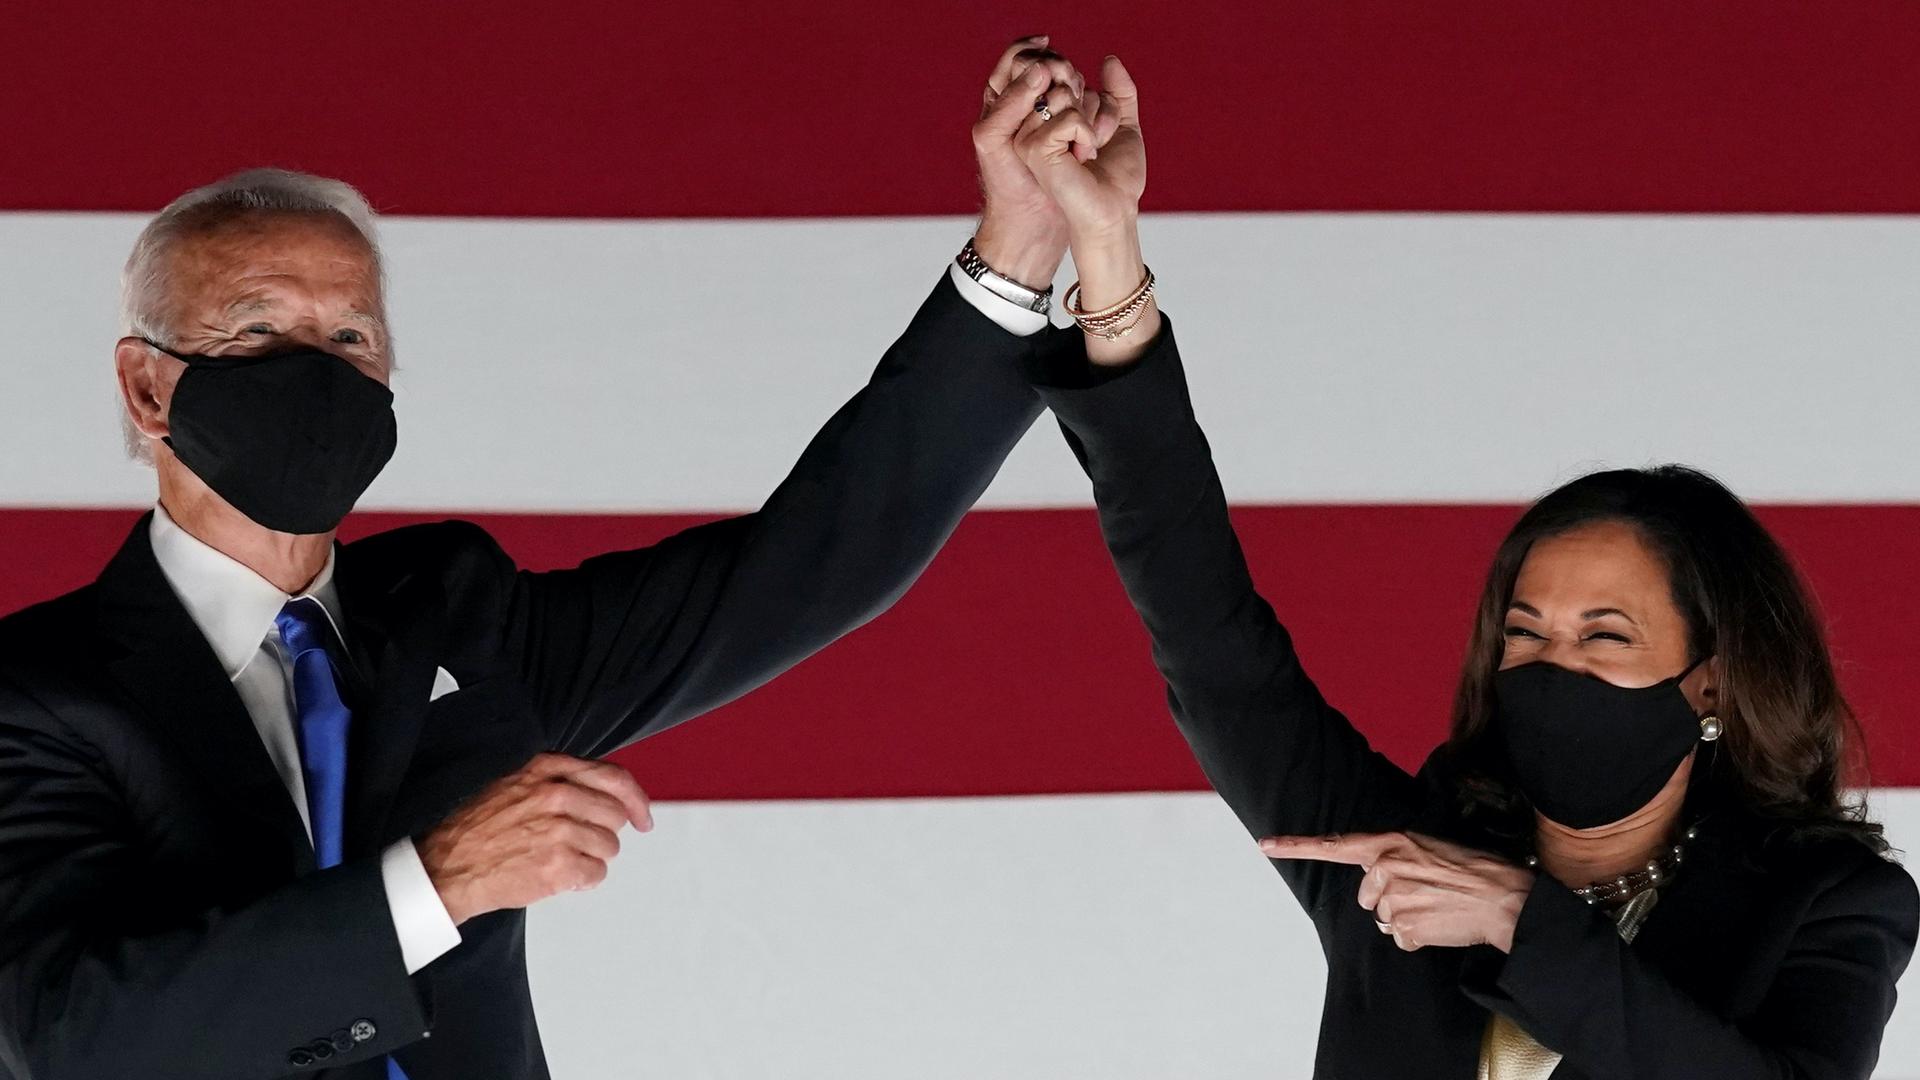 Biden and Harris wear masks, clasp hands, and Harris points at Biden, smiling with her eyes. 